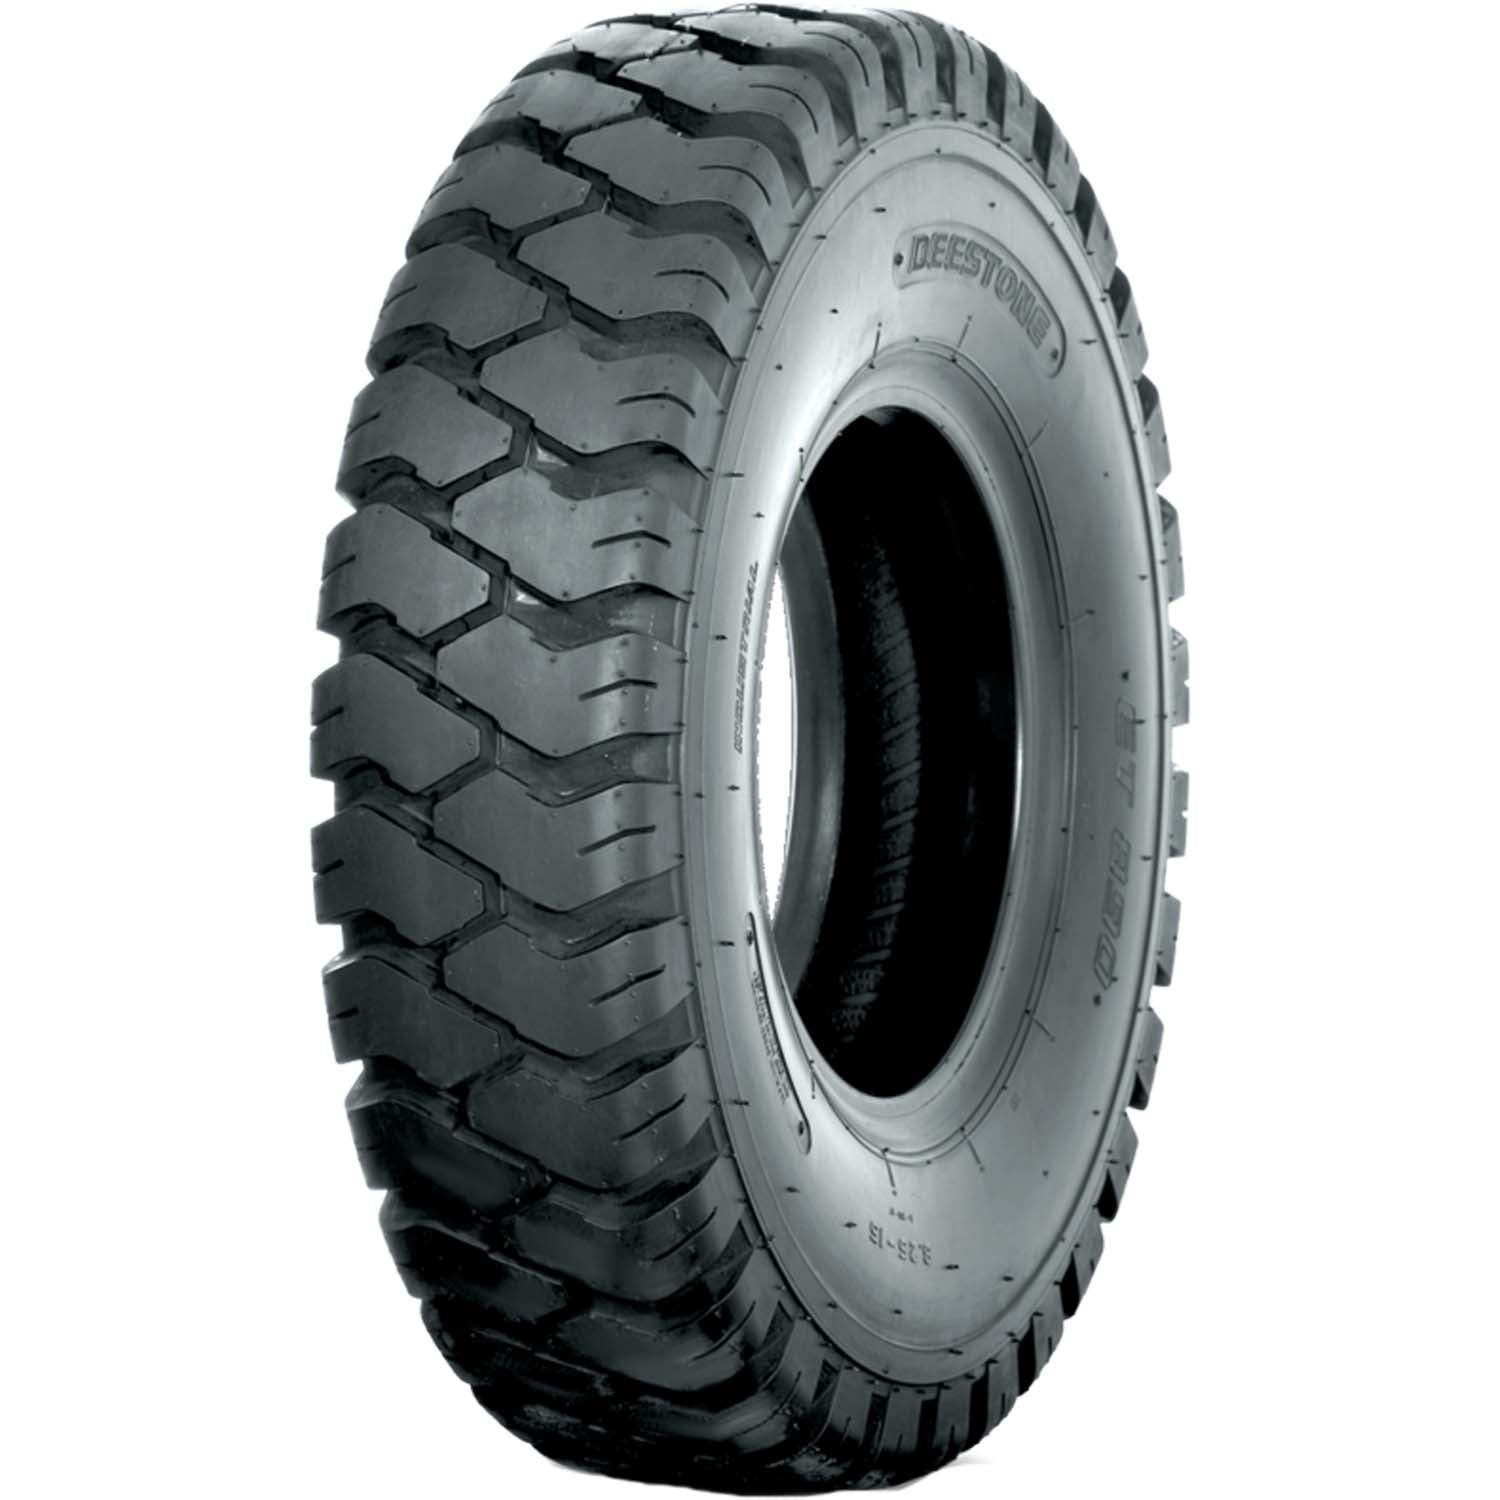 Deestone D301 Forklift Tire With Flap 14ply 8.15-15 (28x9-15)